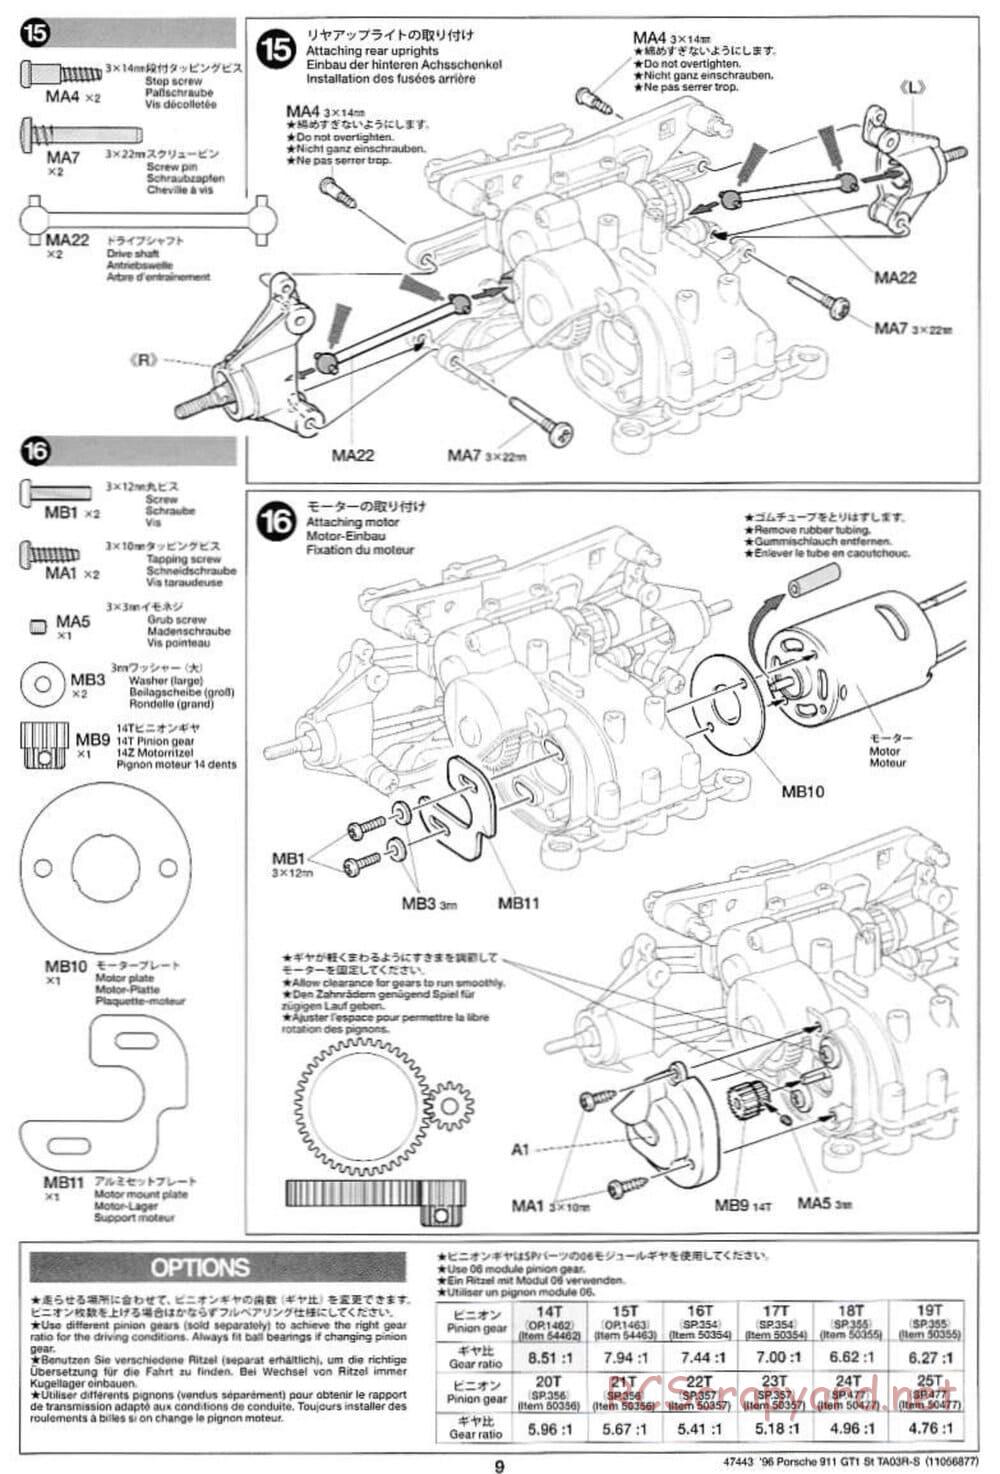 Tamiya - Porsche 911 GT1 Street - TA-03RS Chassis - Manual - Page 9